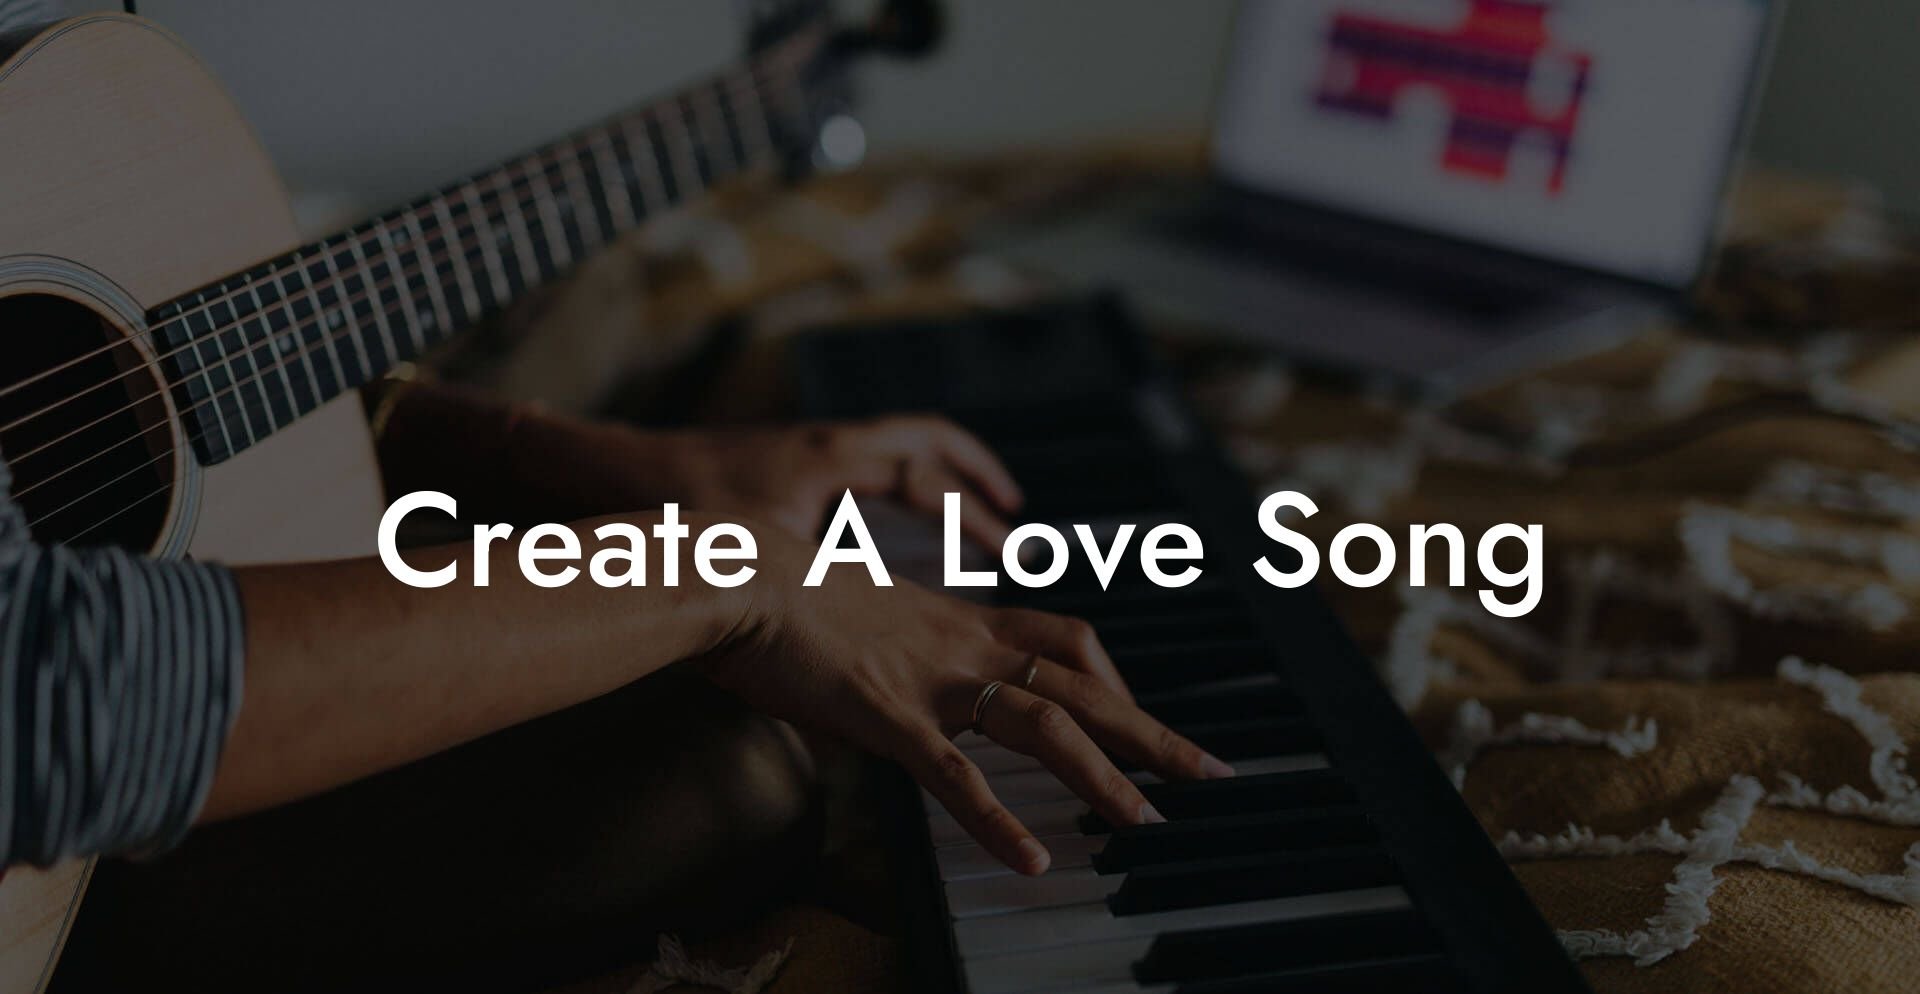 create a love song lyric assistant